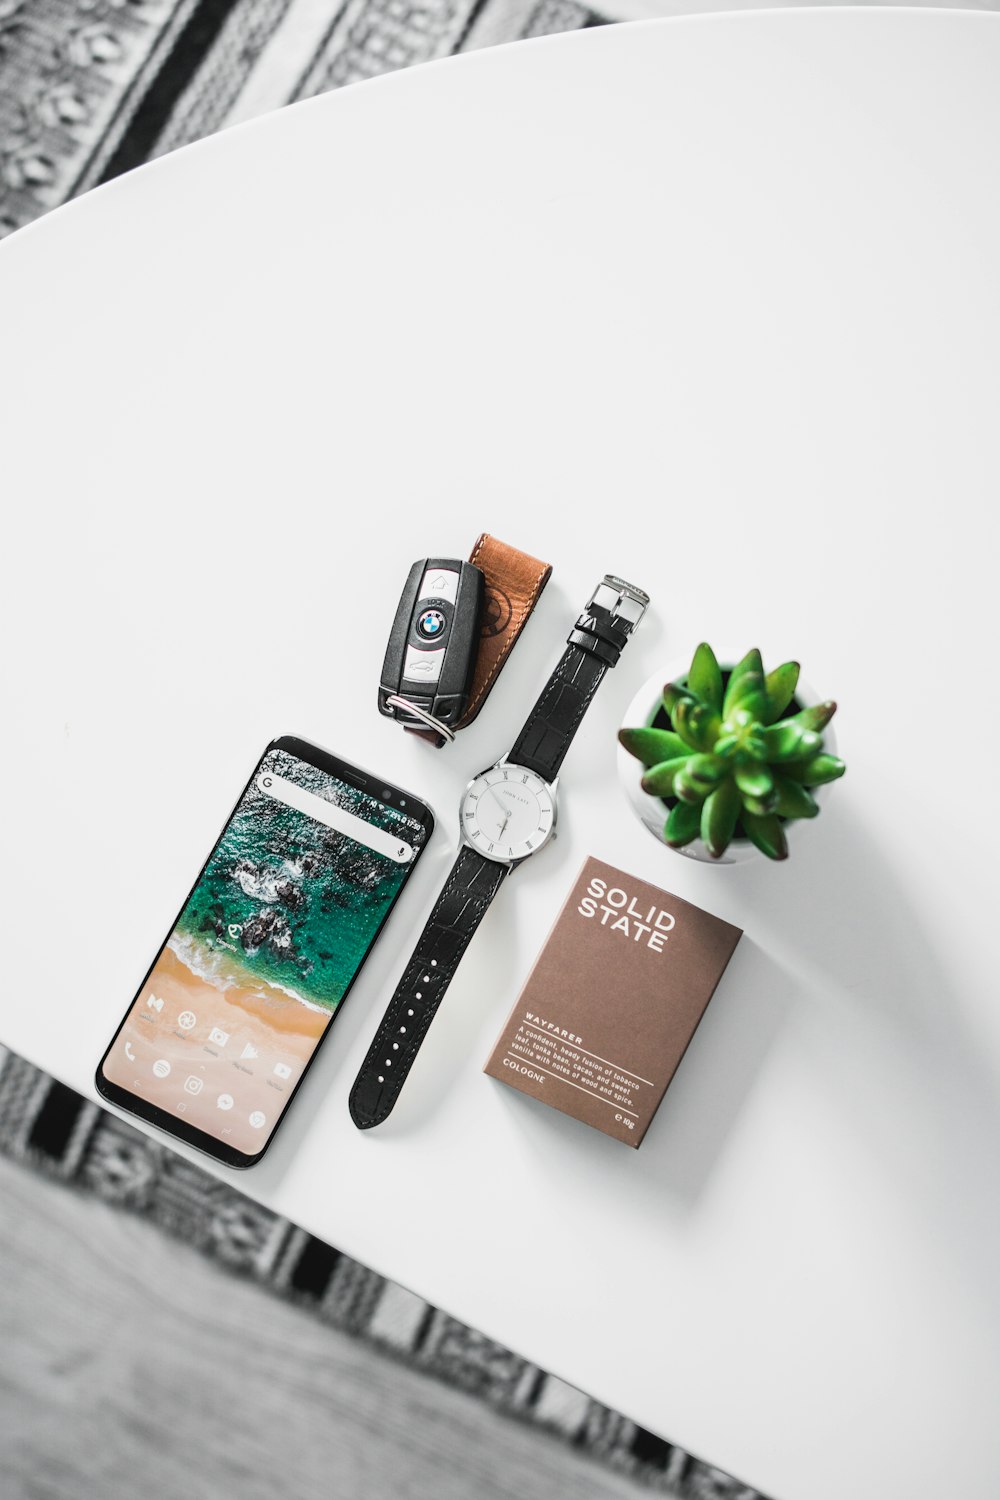 flat lay photography of watch, smartphone, car fob, and box